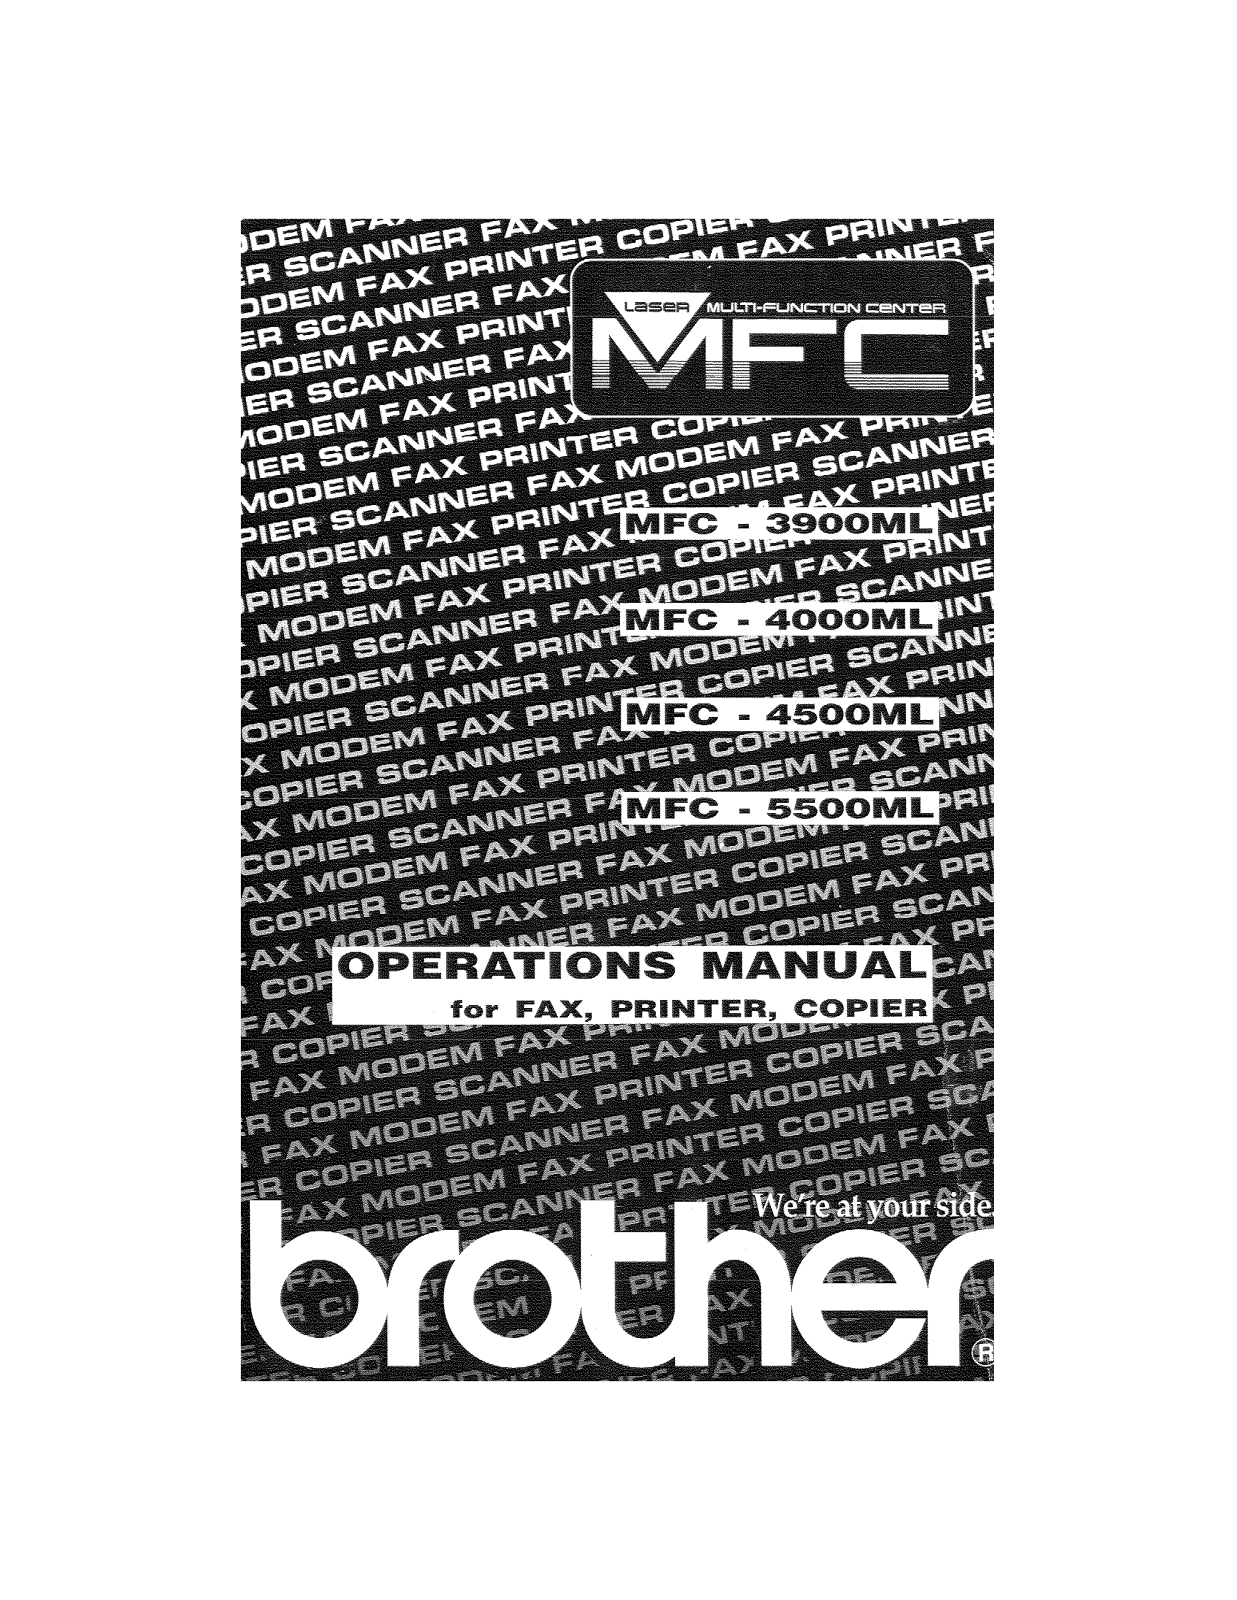 Brother MFC-3900ML User Manual